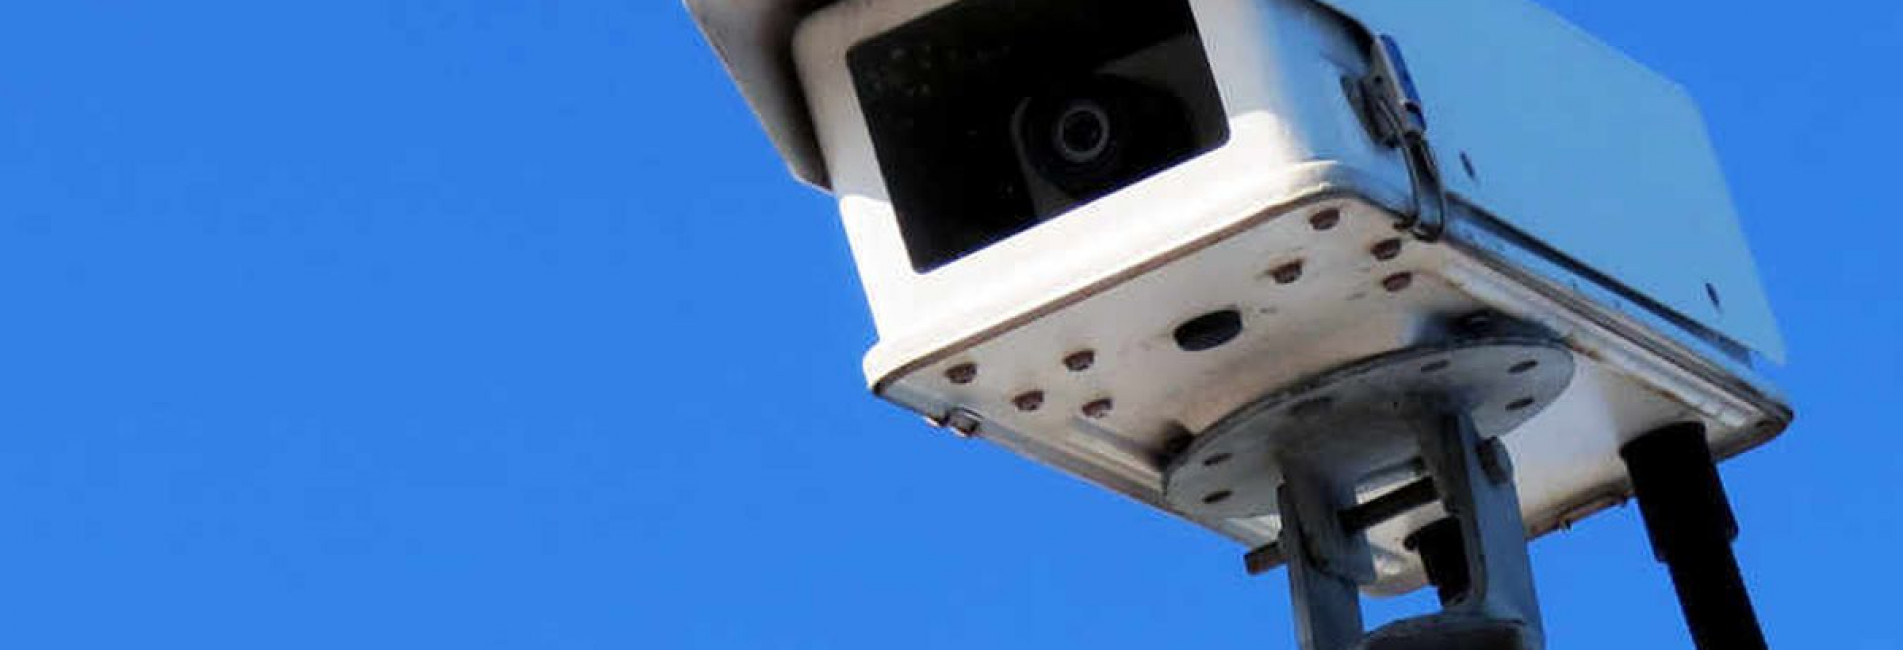 A new CCTV system has been installed in Ludlow to help make the town safer. As featured in the Shropshire Star - read the article now.